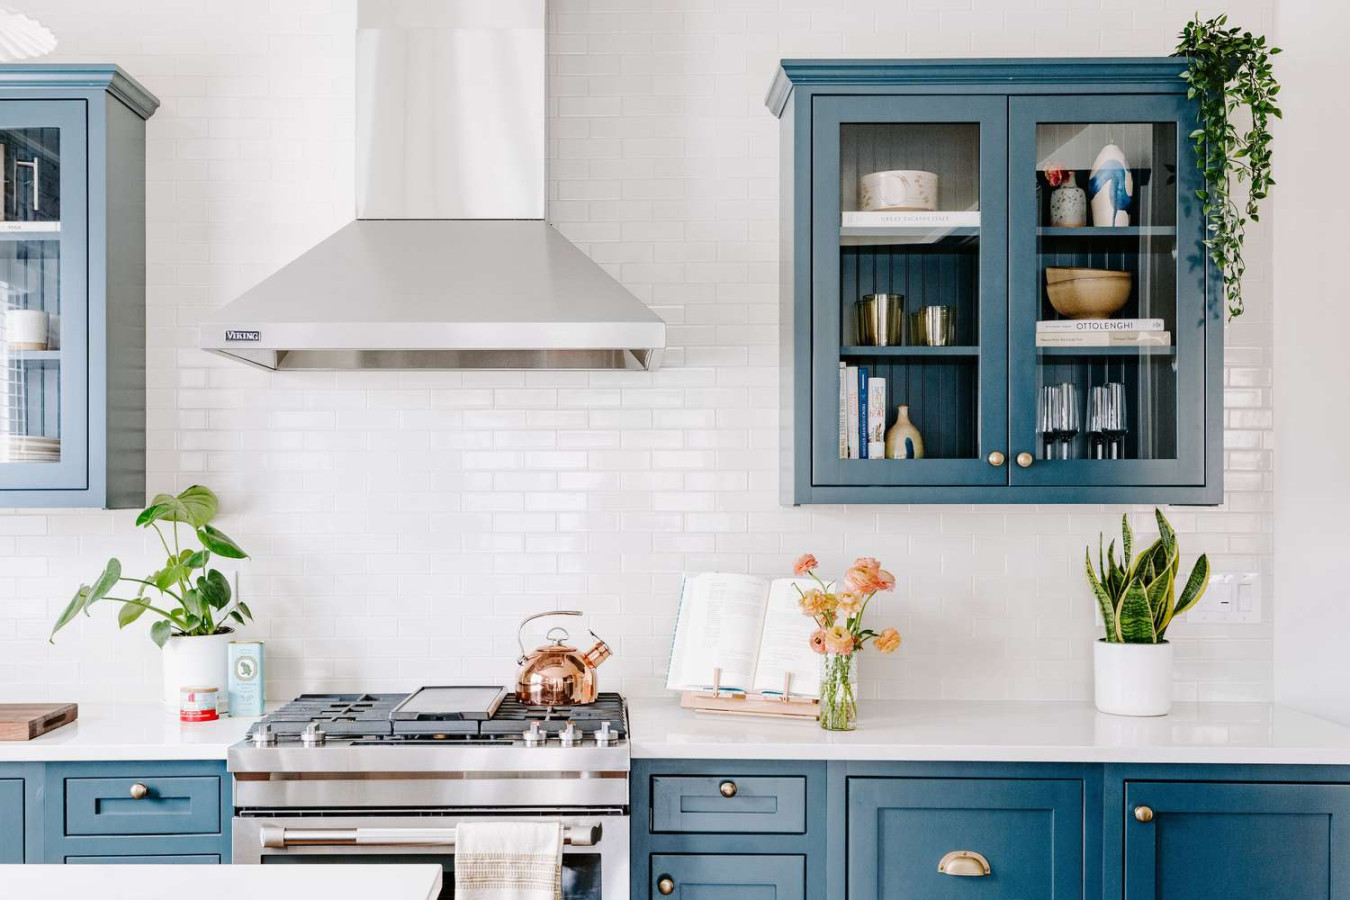 Beautiful, Functional Kitchens to Inspire Your Own